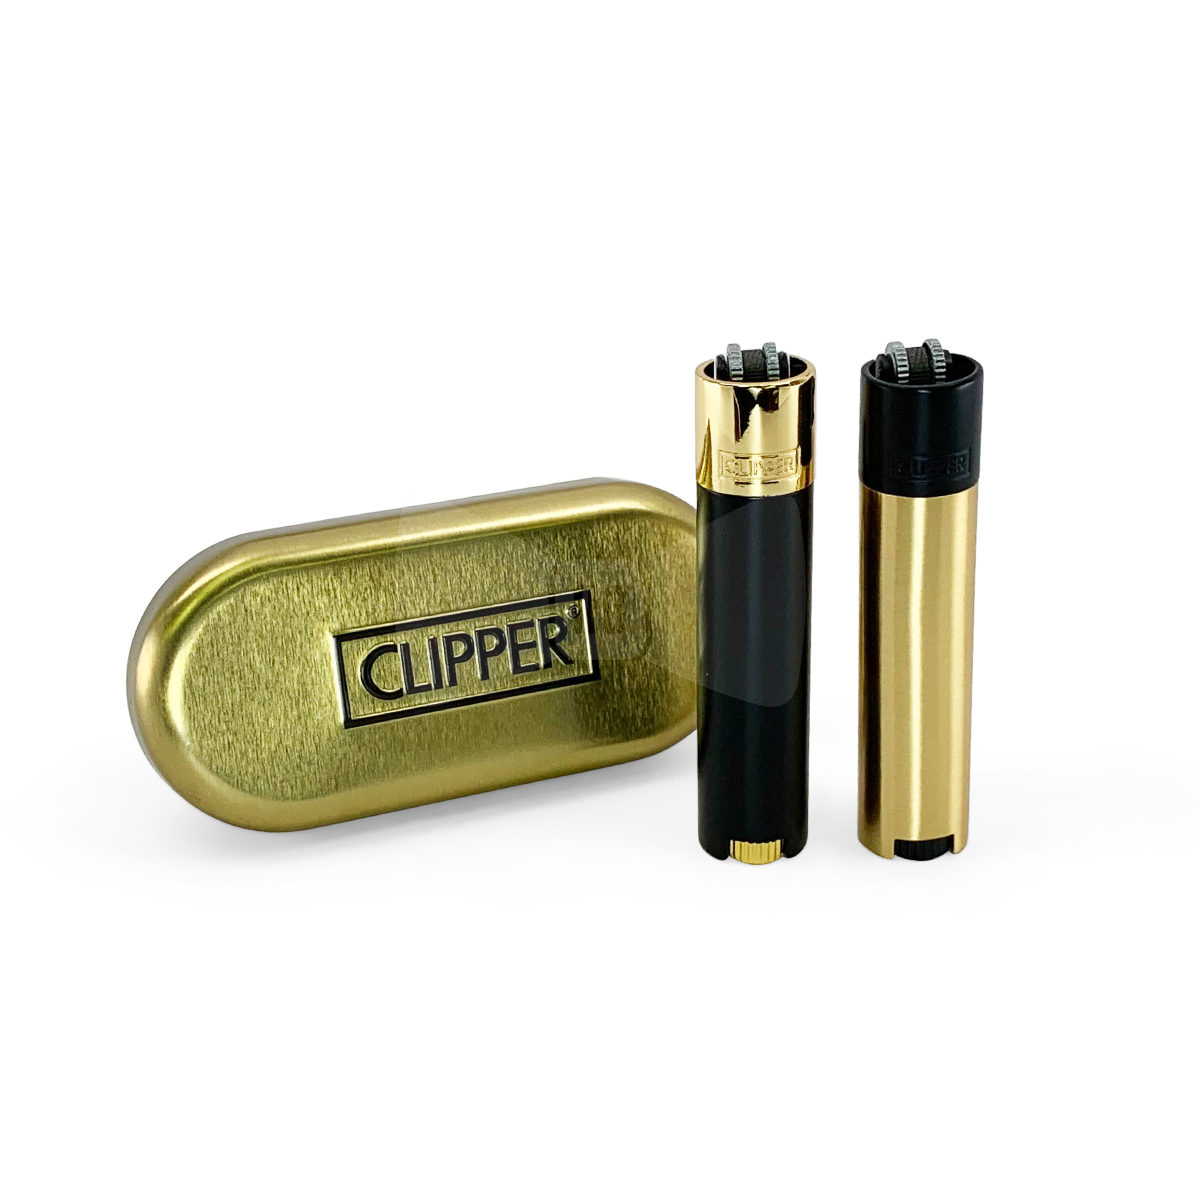 Clipper Full Metal Black & Gold Lighters Two Pack